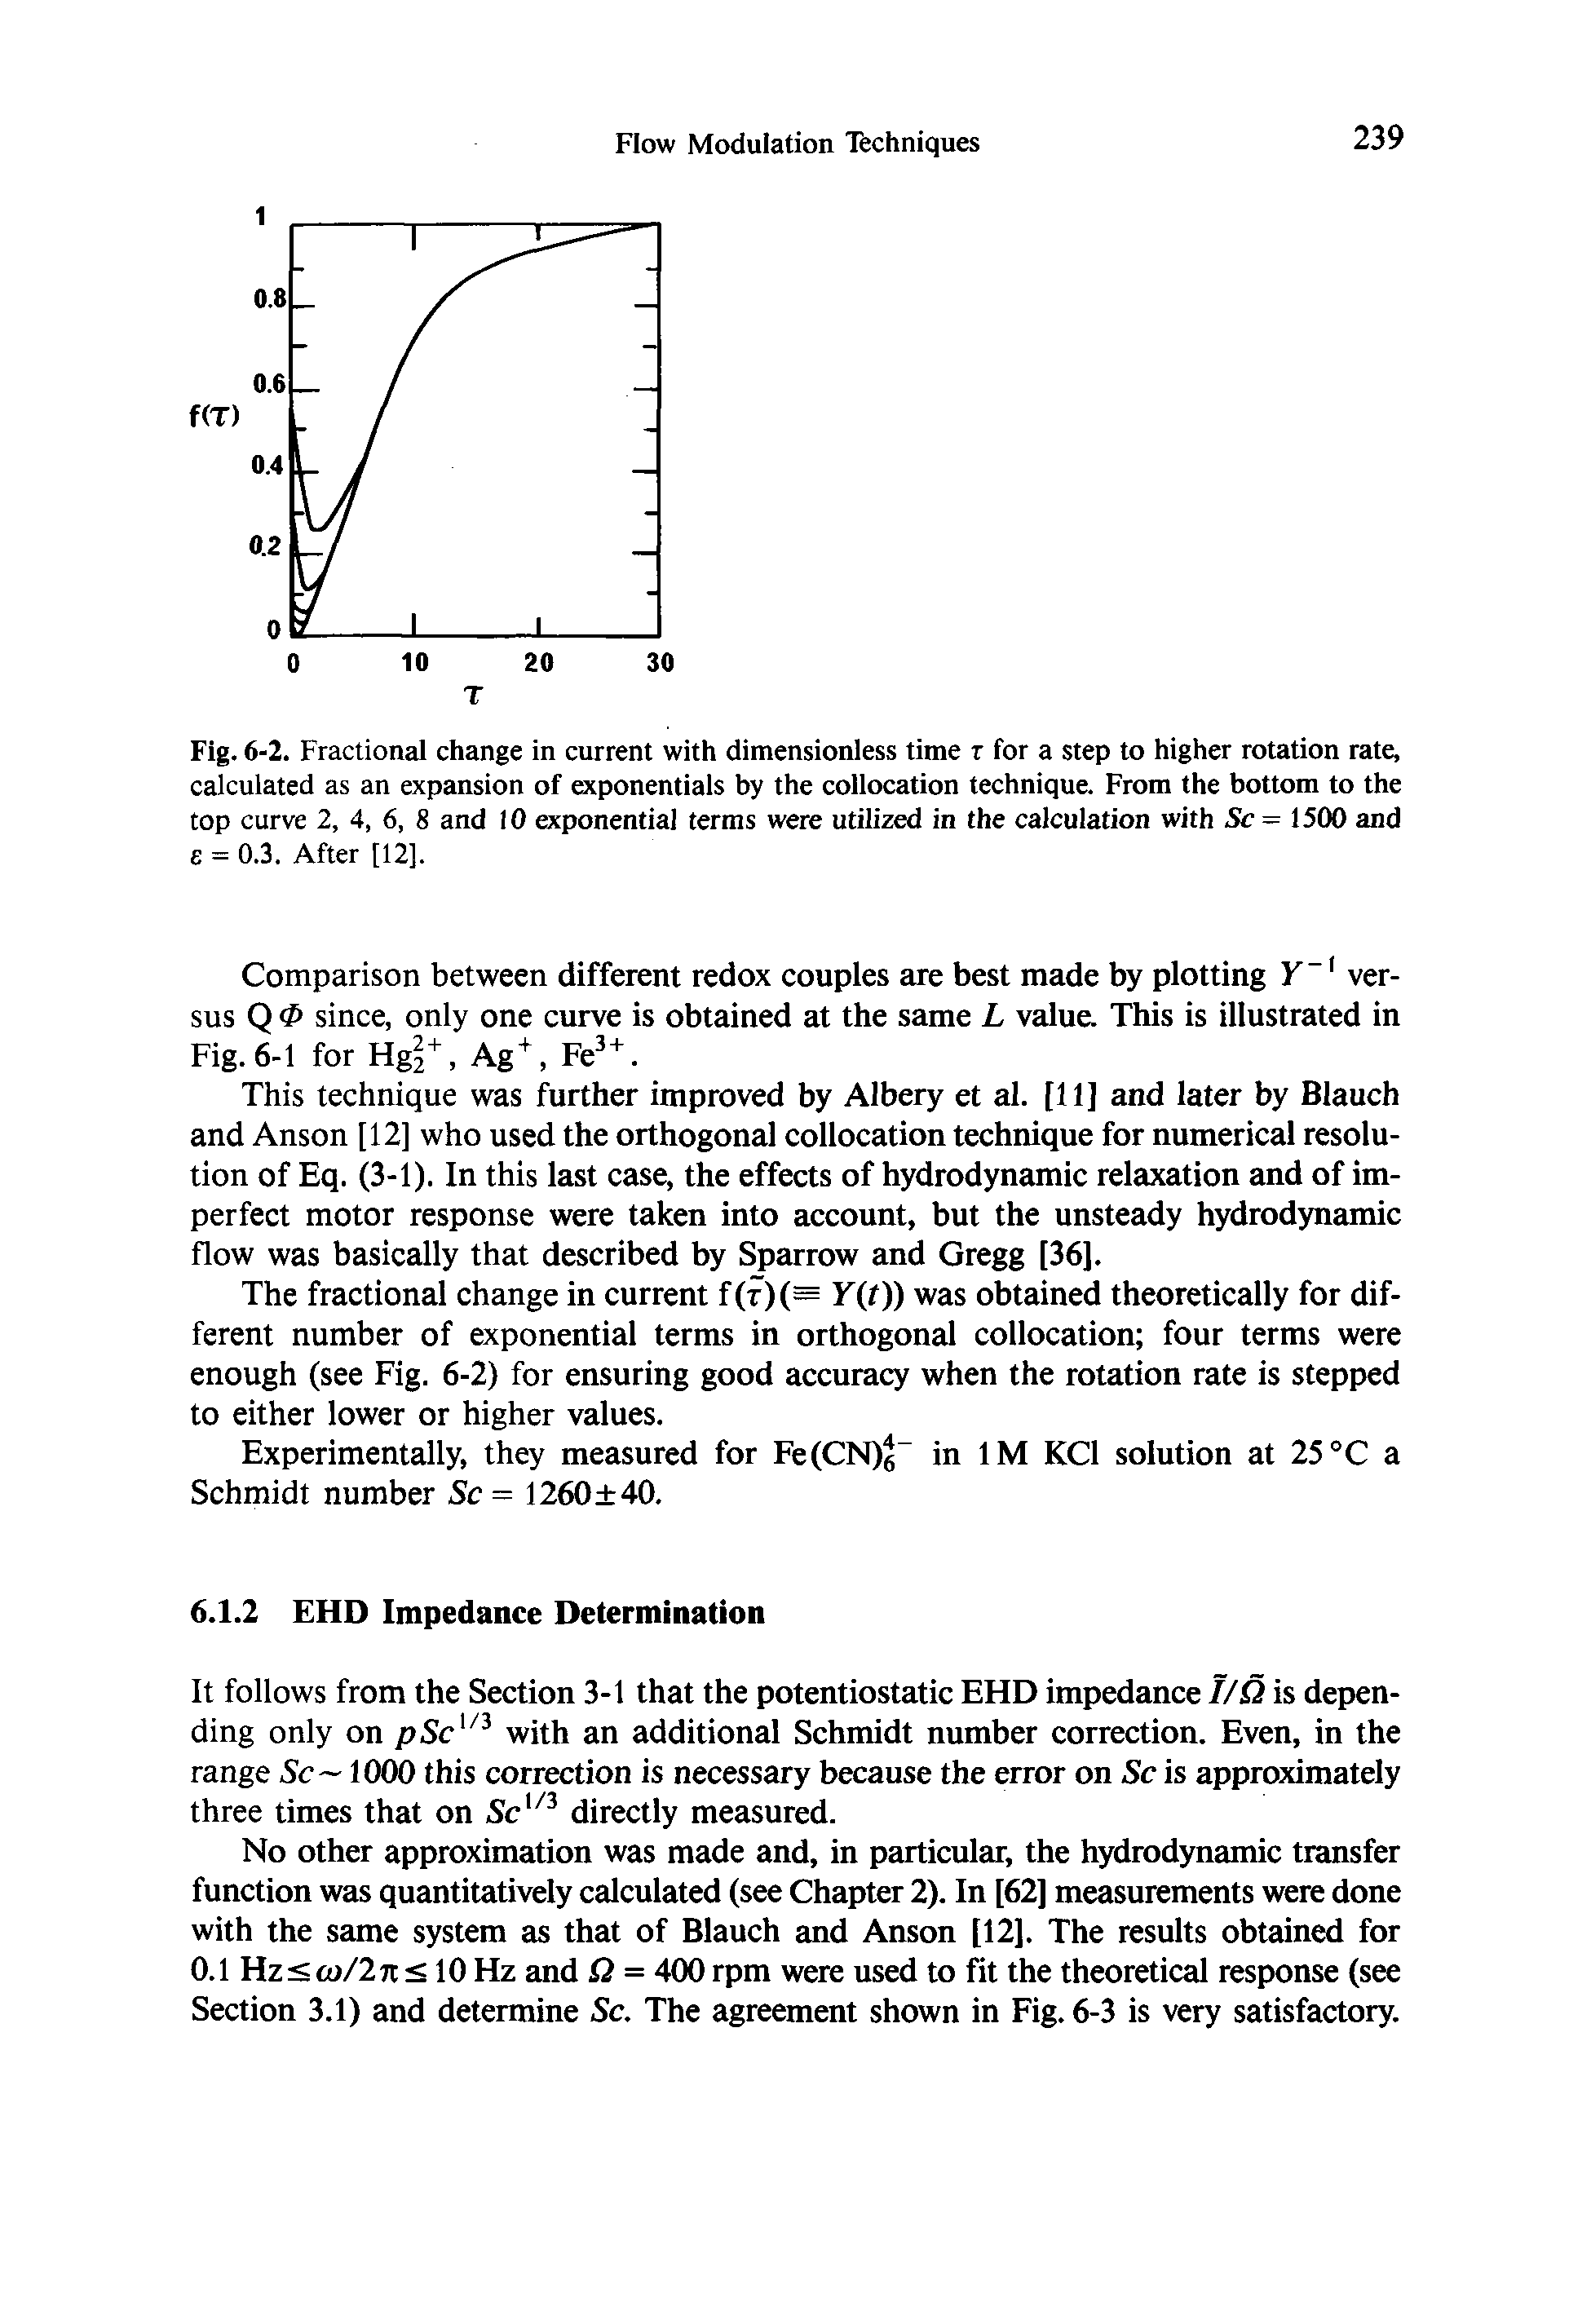 Fig. 6-2. Fractional change in current with dimensionless time r for a step to higher rotation rate, calculated as an expansion of exponentials by the collocation technique. From the bottom to the top curve 2, 4, 6, 8 and 10 exponential terms were utilized in the calculation with Sc = 1500 and 6 = 0.3. After [12].